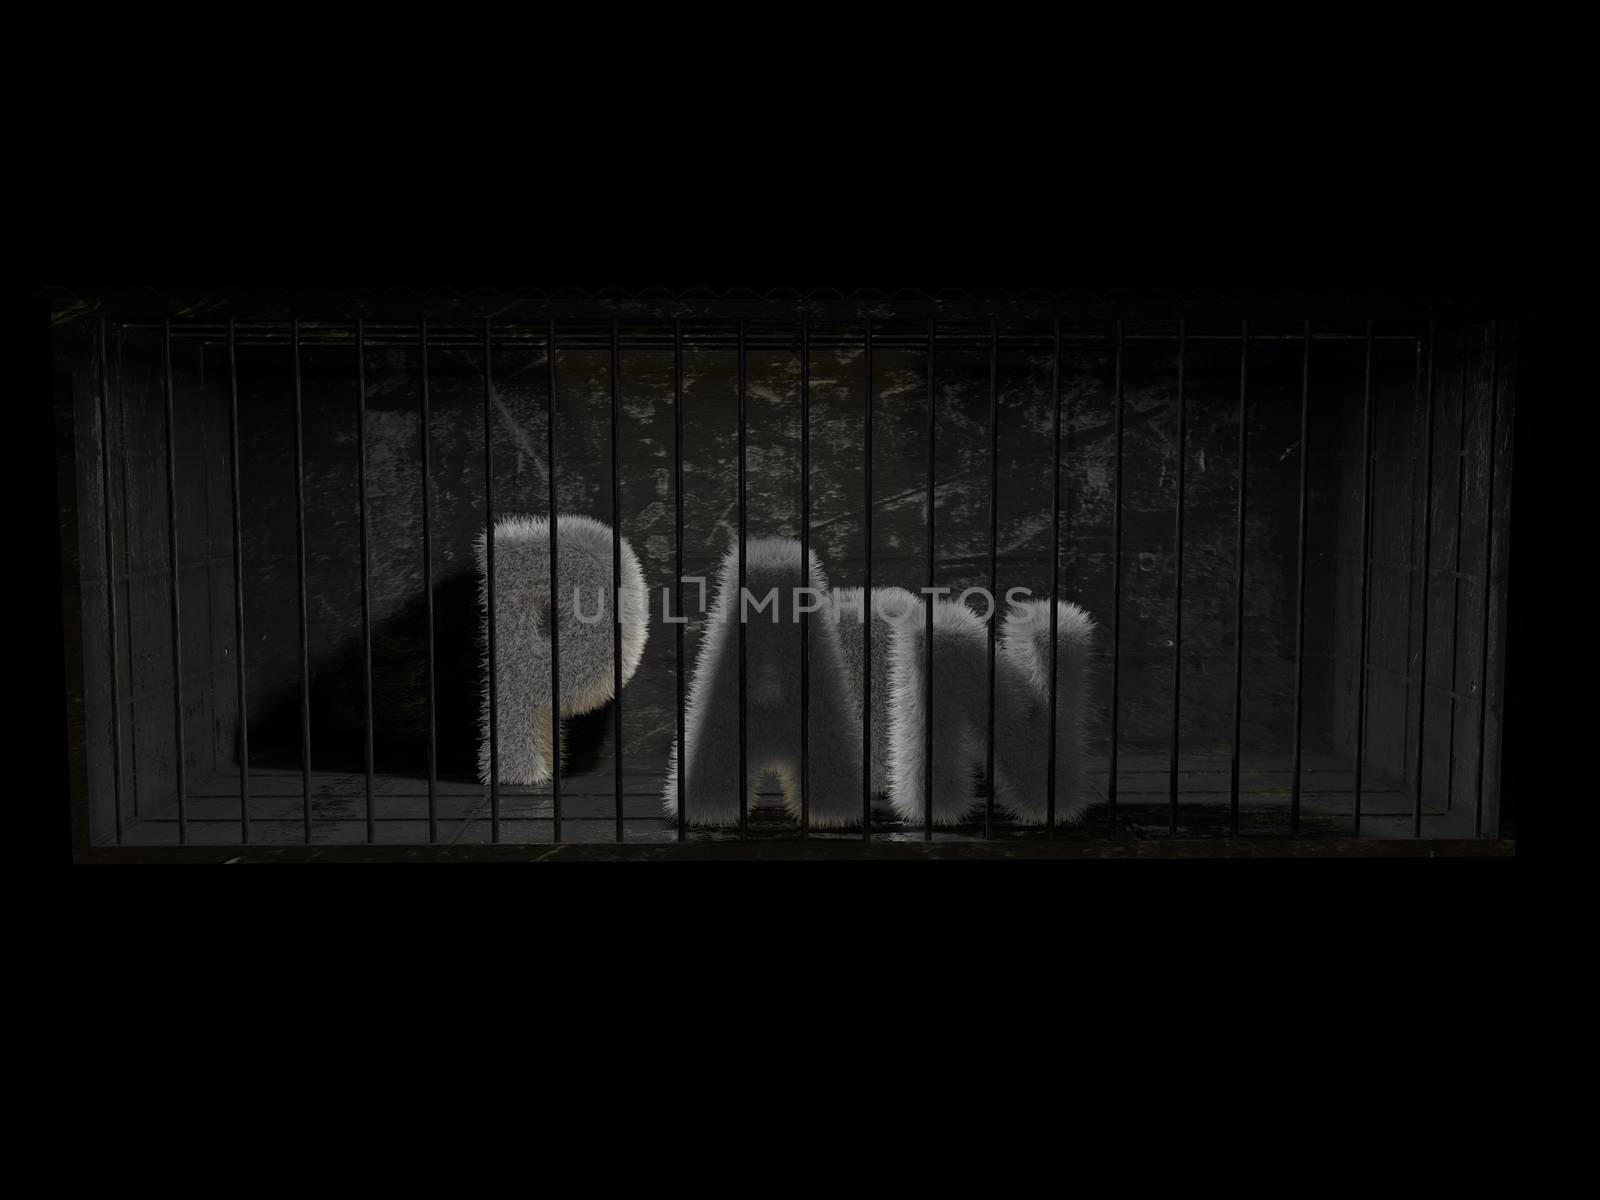 3D pain word inside a prison by fares139